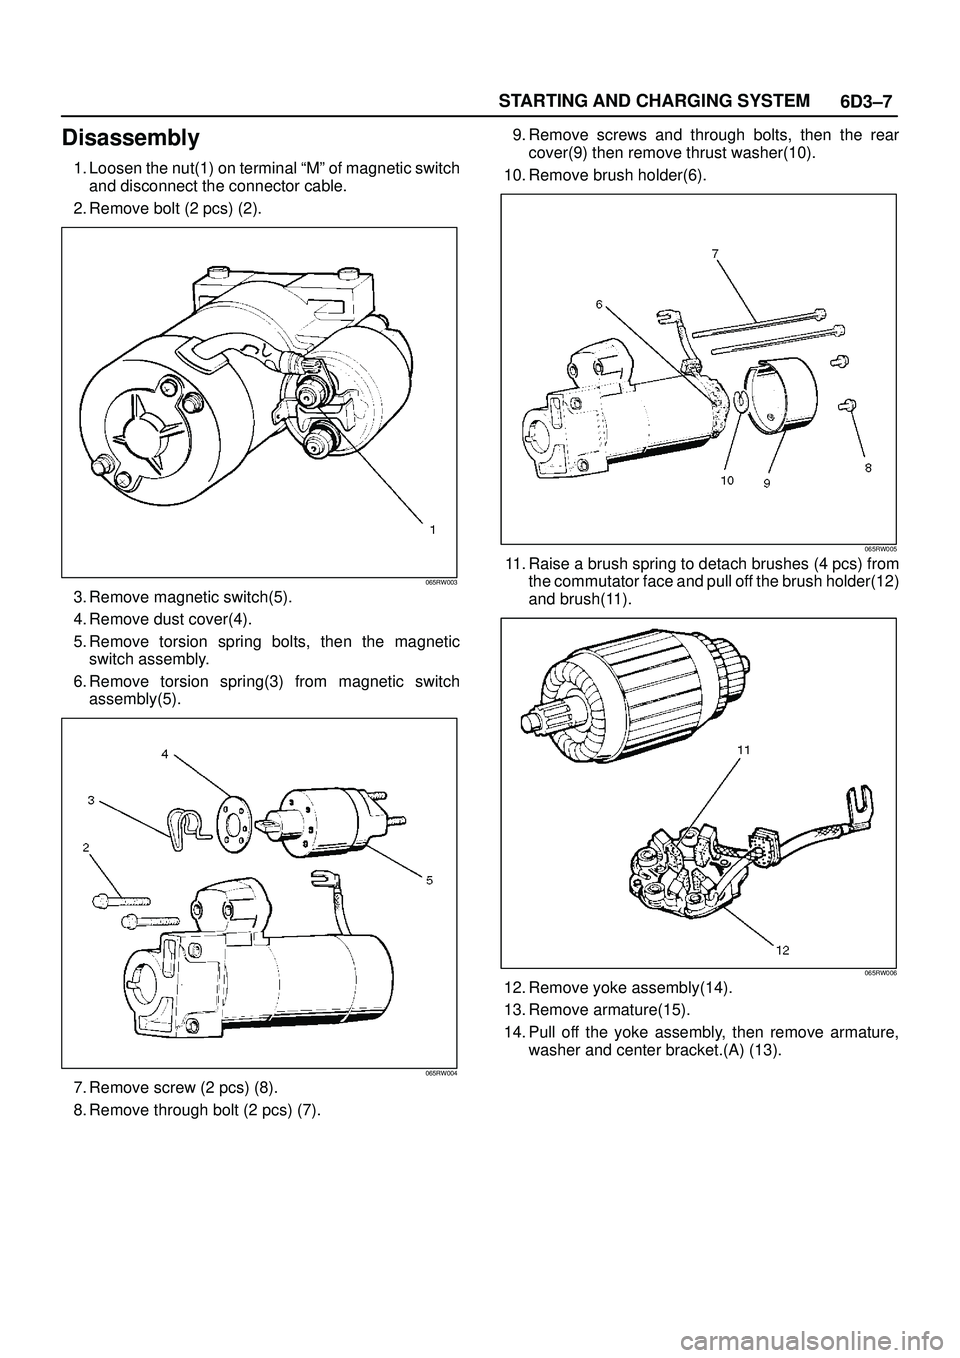 ISUZU TROOPER 1998  Service Owners Manual 6D3±7 STARTING AND CHARGING SYSTEM
Disassembly
1. Loosen the nut(1) on terminal ªMº of magnetic switch
and disconnect the connector cable.
2. Remove bolt (2 pcs) (2).
065RW003
3. Remove magnetic sw